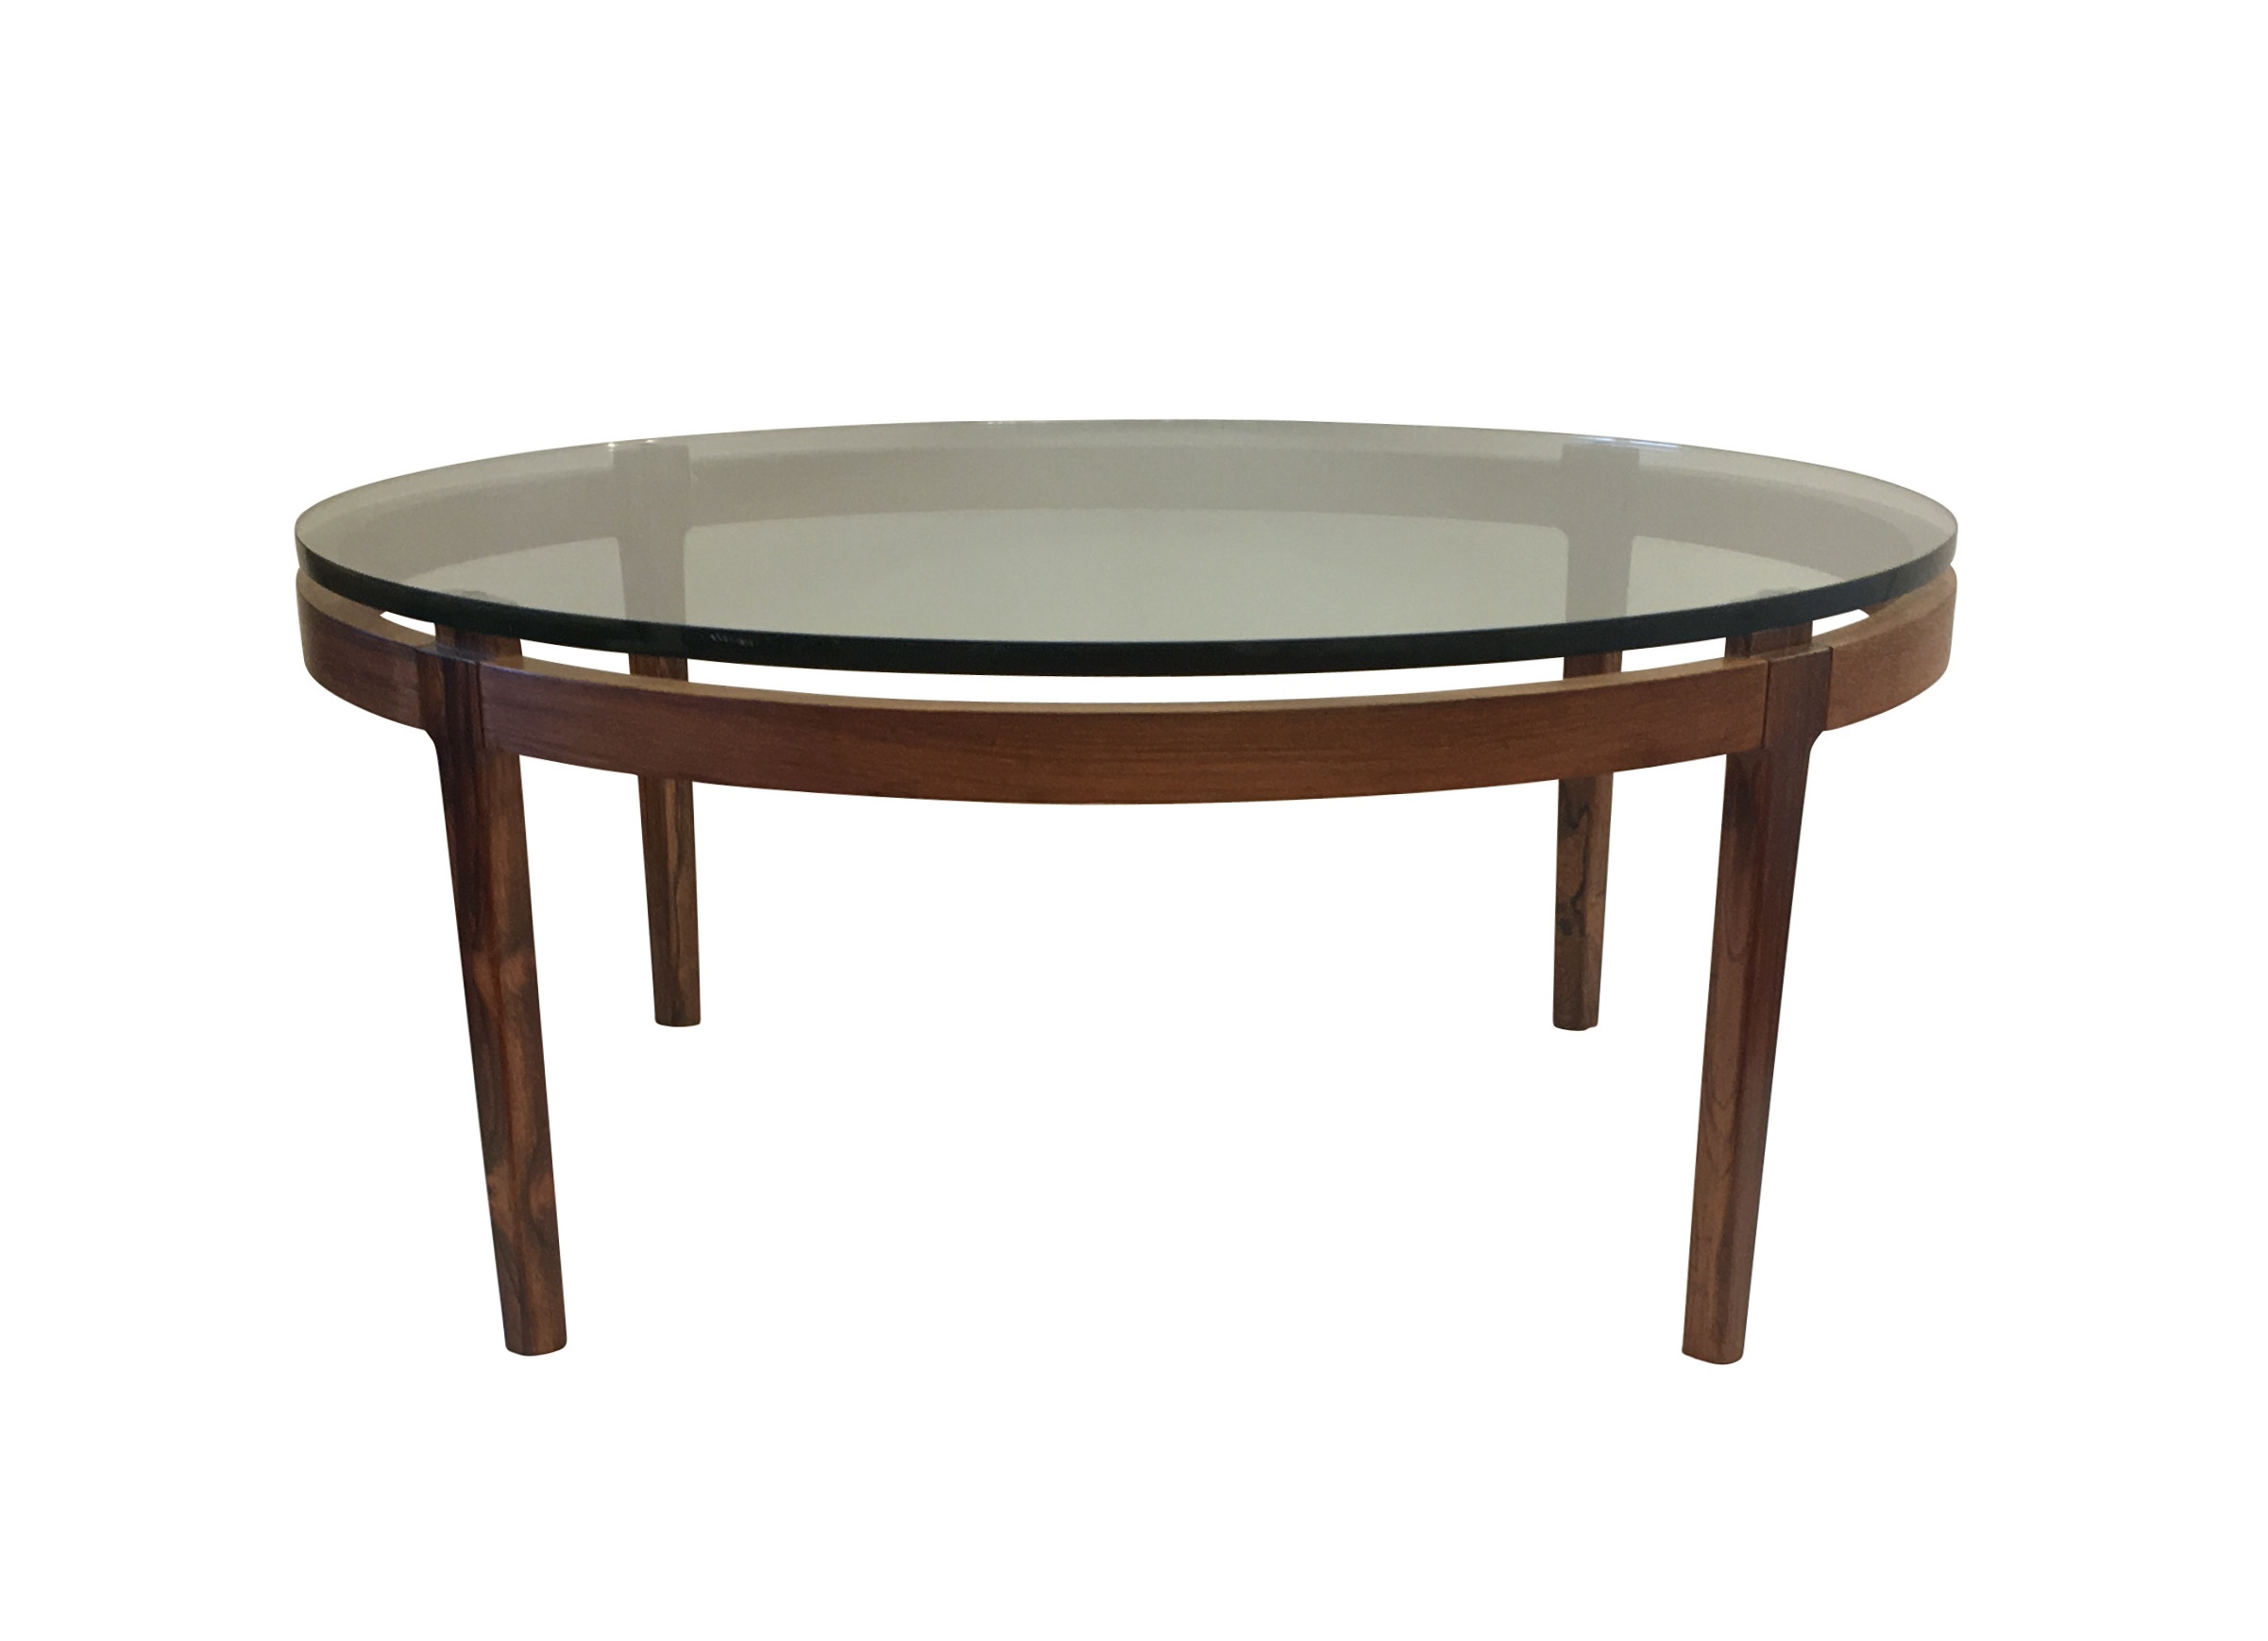 Round Rosewood Coffee Table with glass top